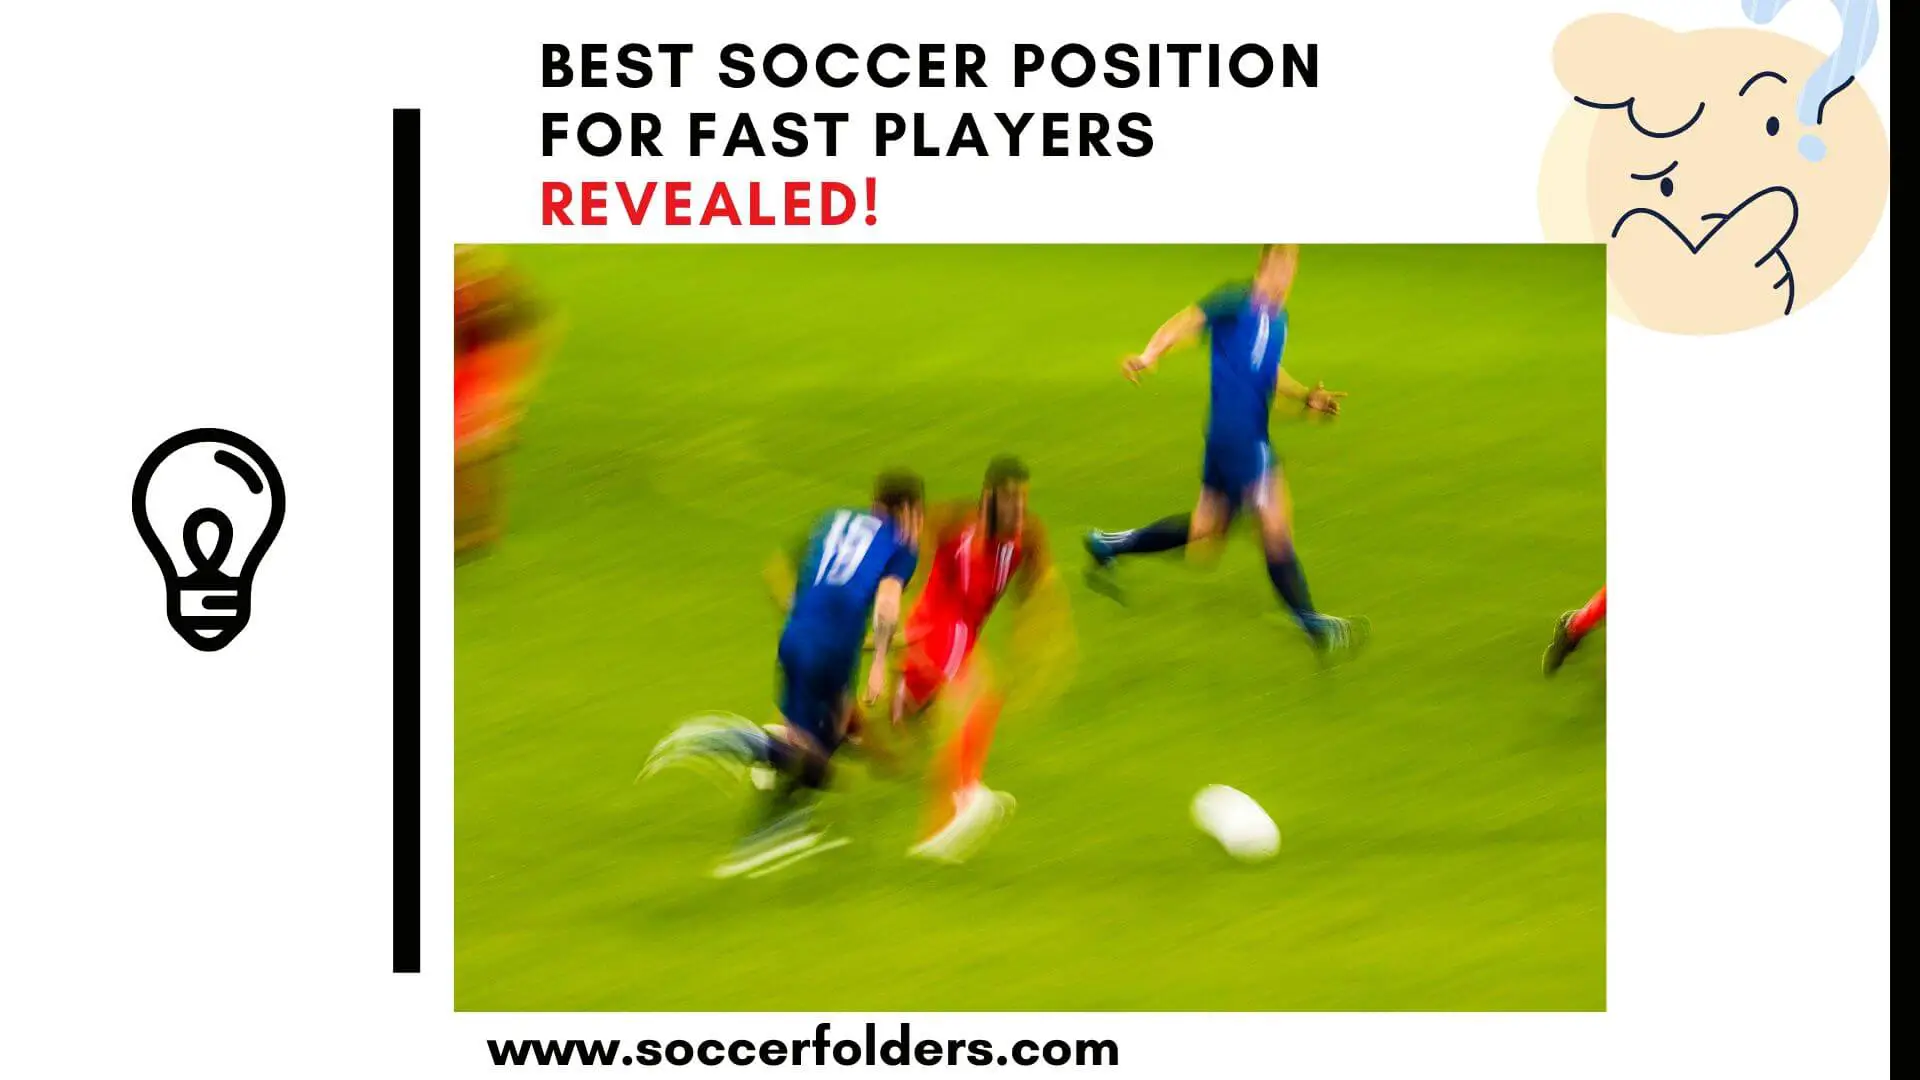 Best soccer position for fast players - Featured image